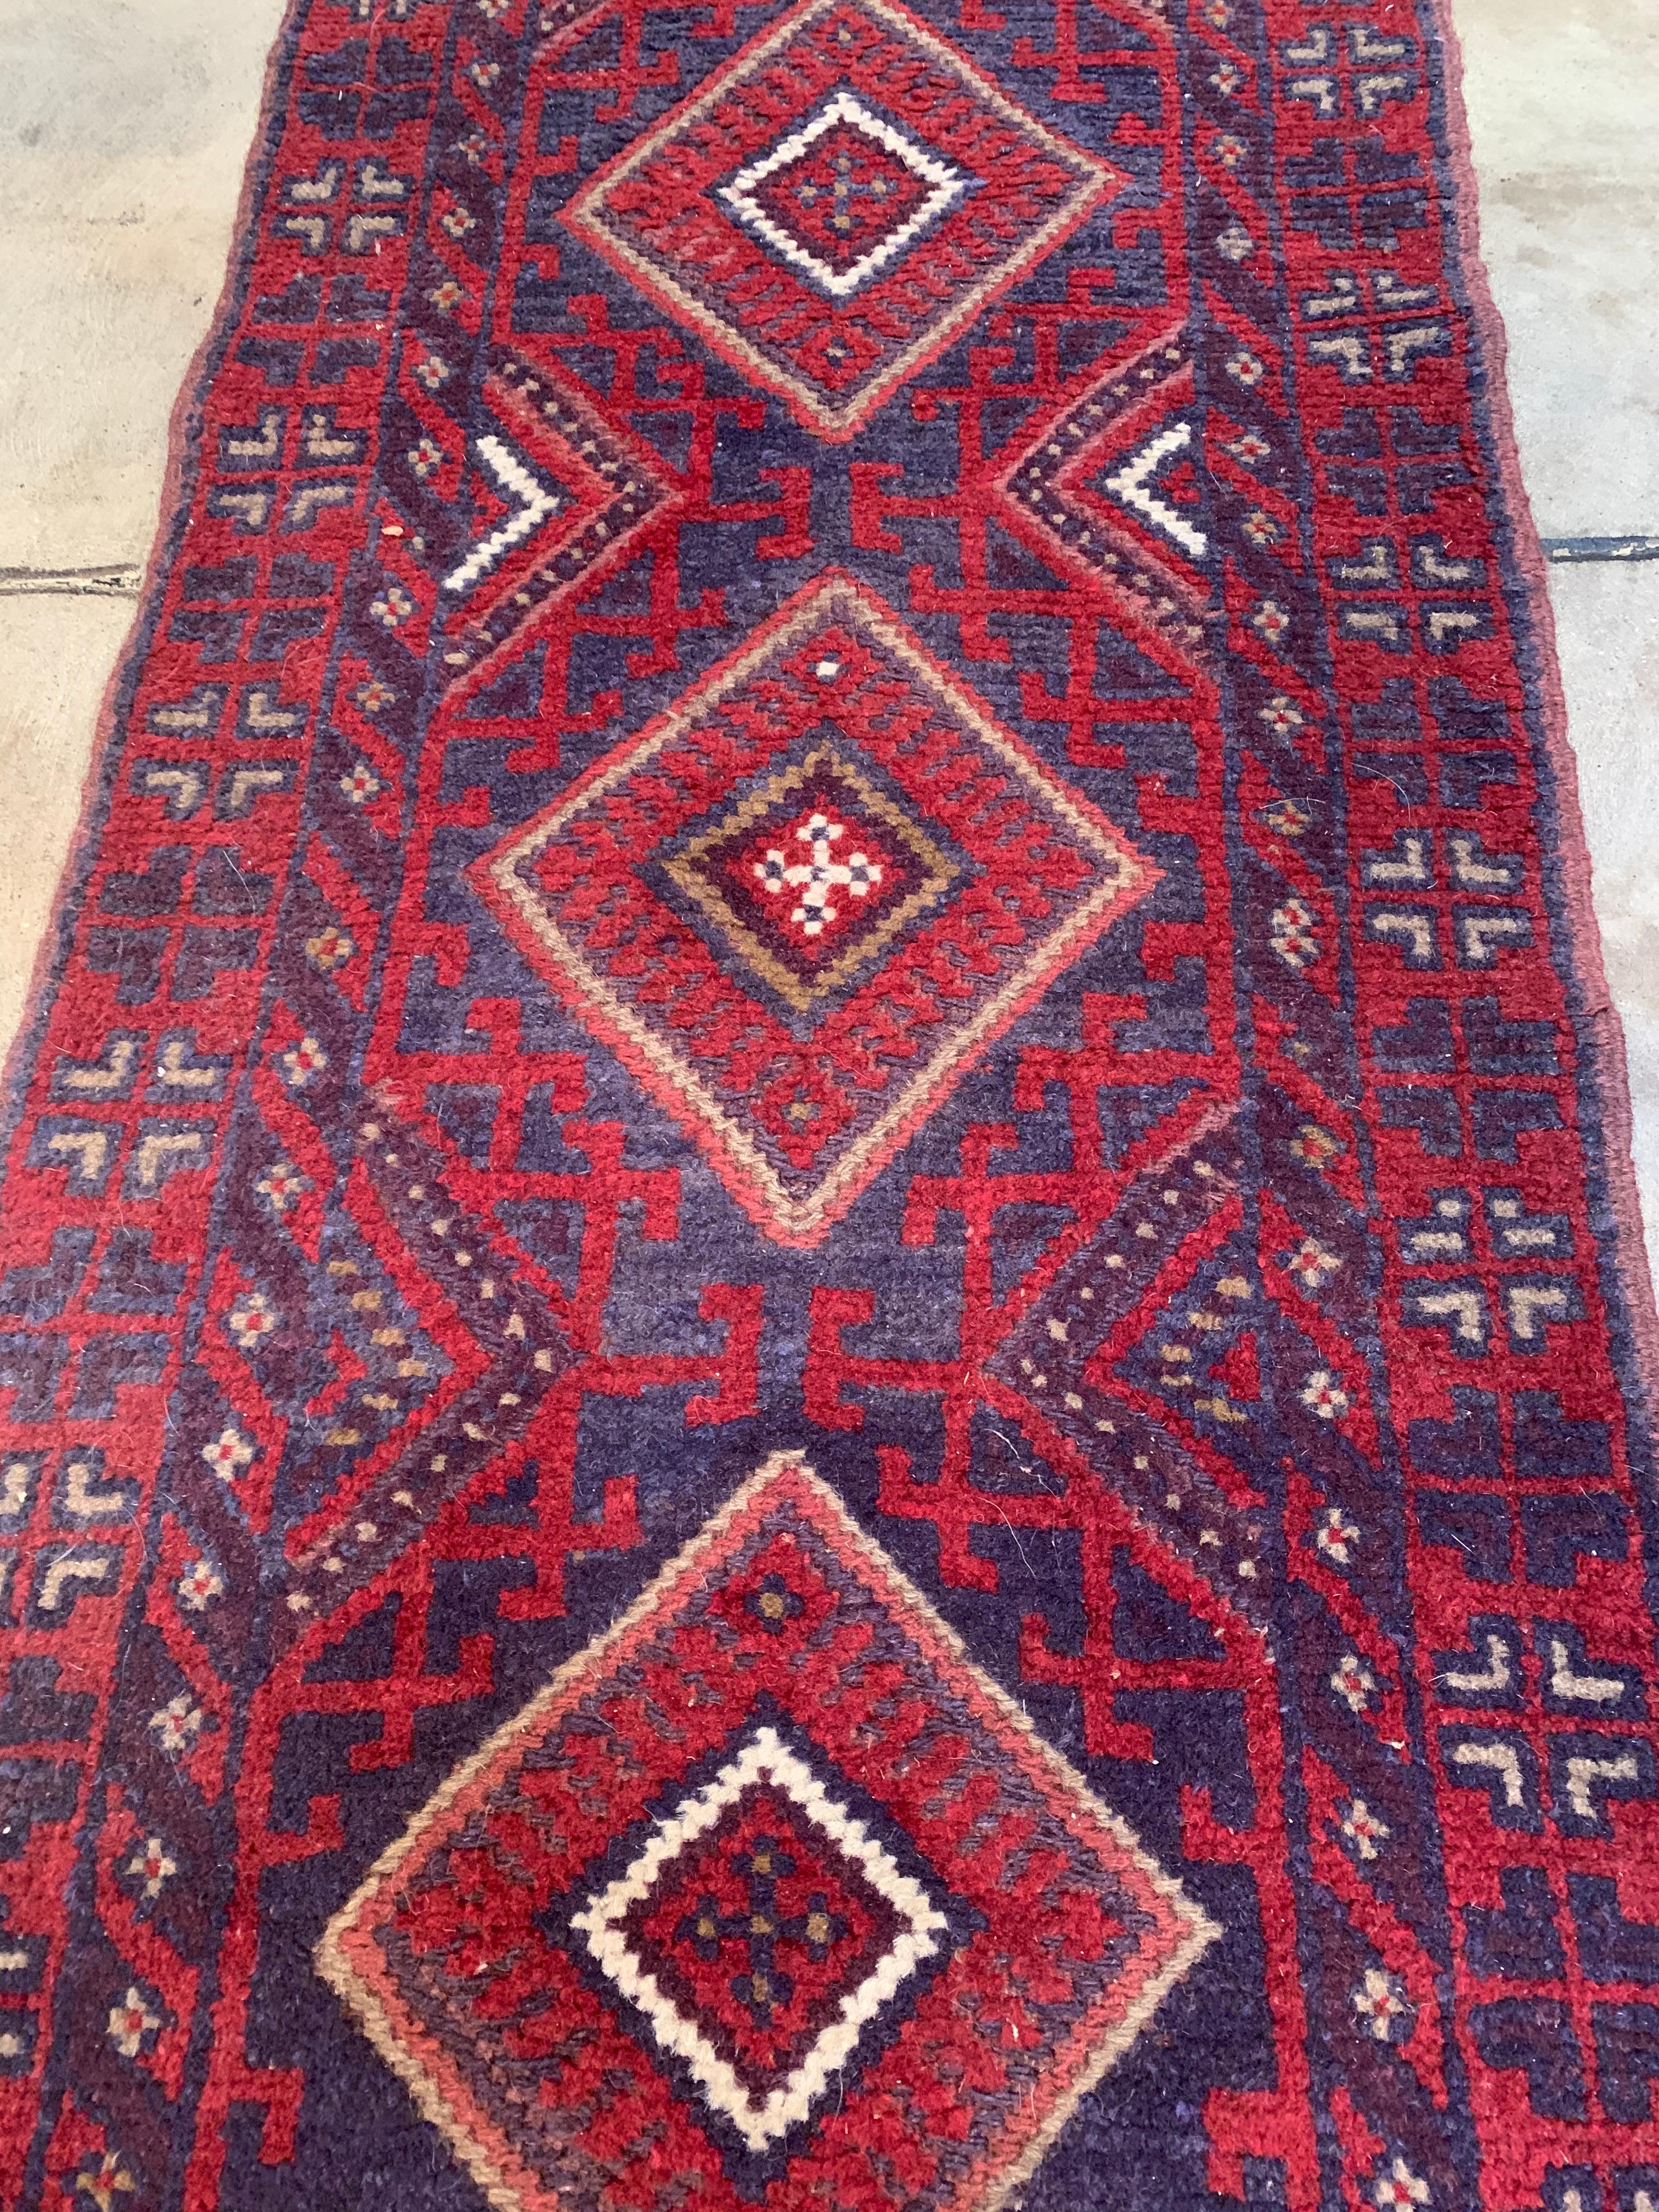 Offered is a antique Mushani style rug runner. This runner is in great condition. The colors are vibrant and there is no visible fading.

 